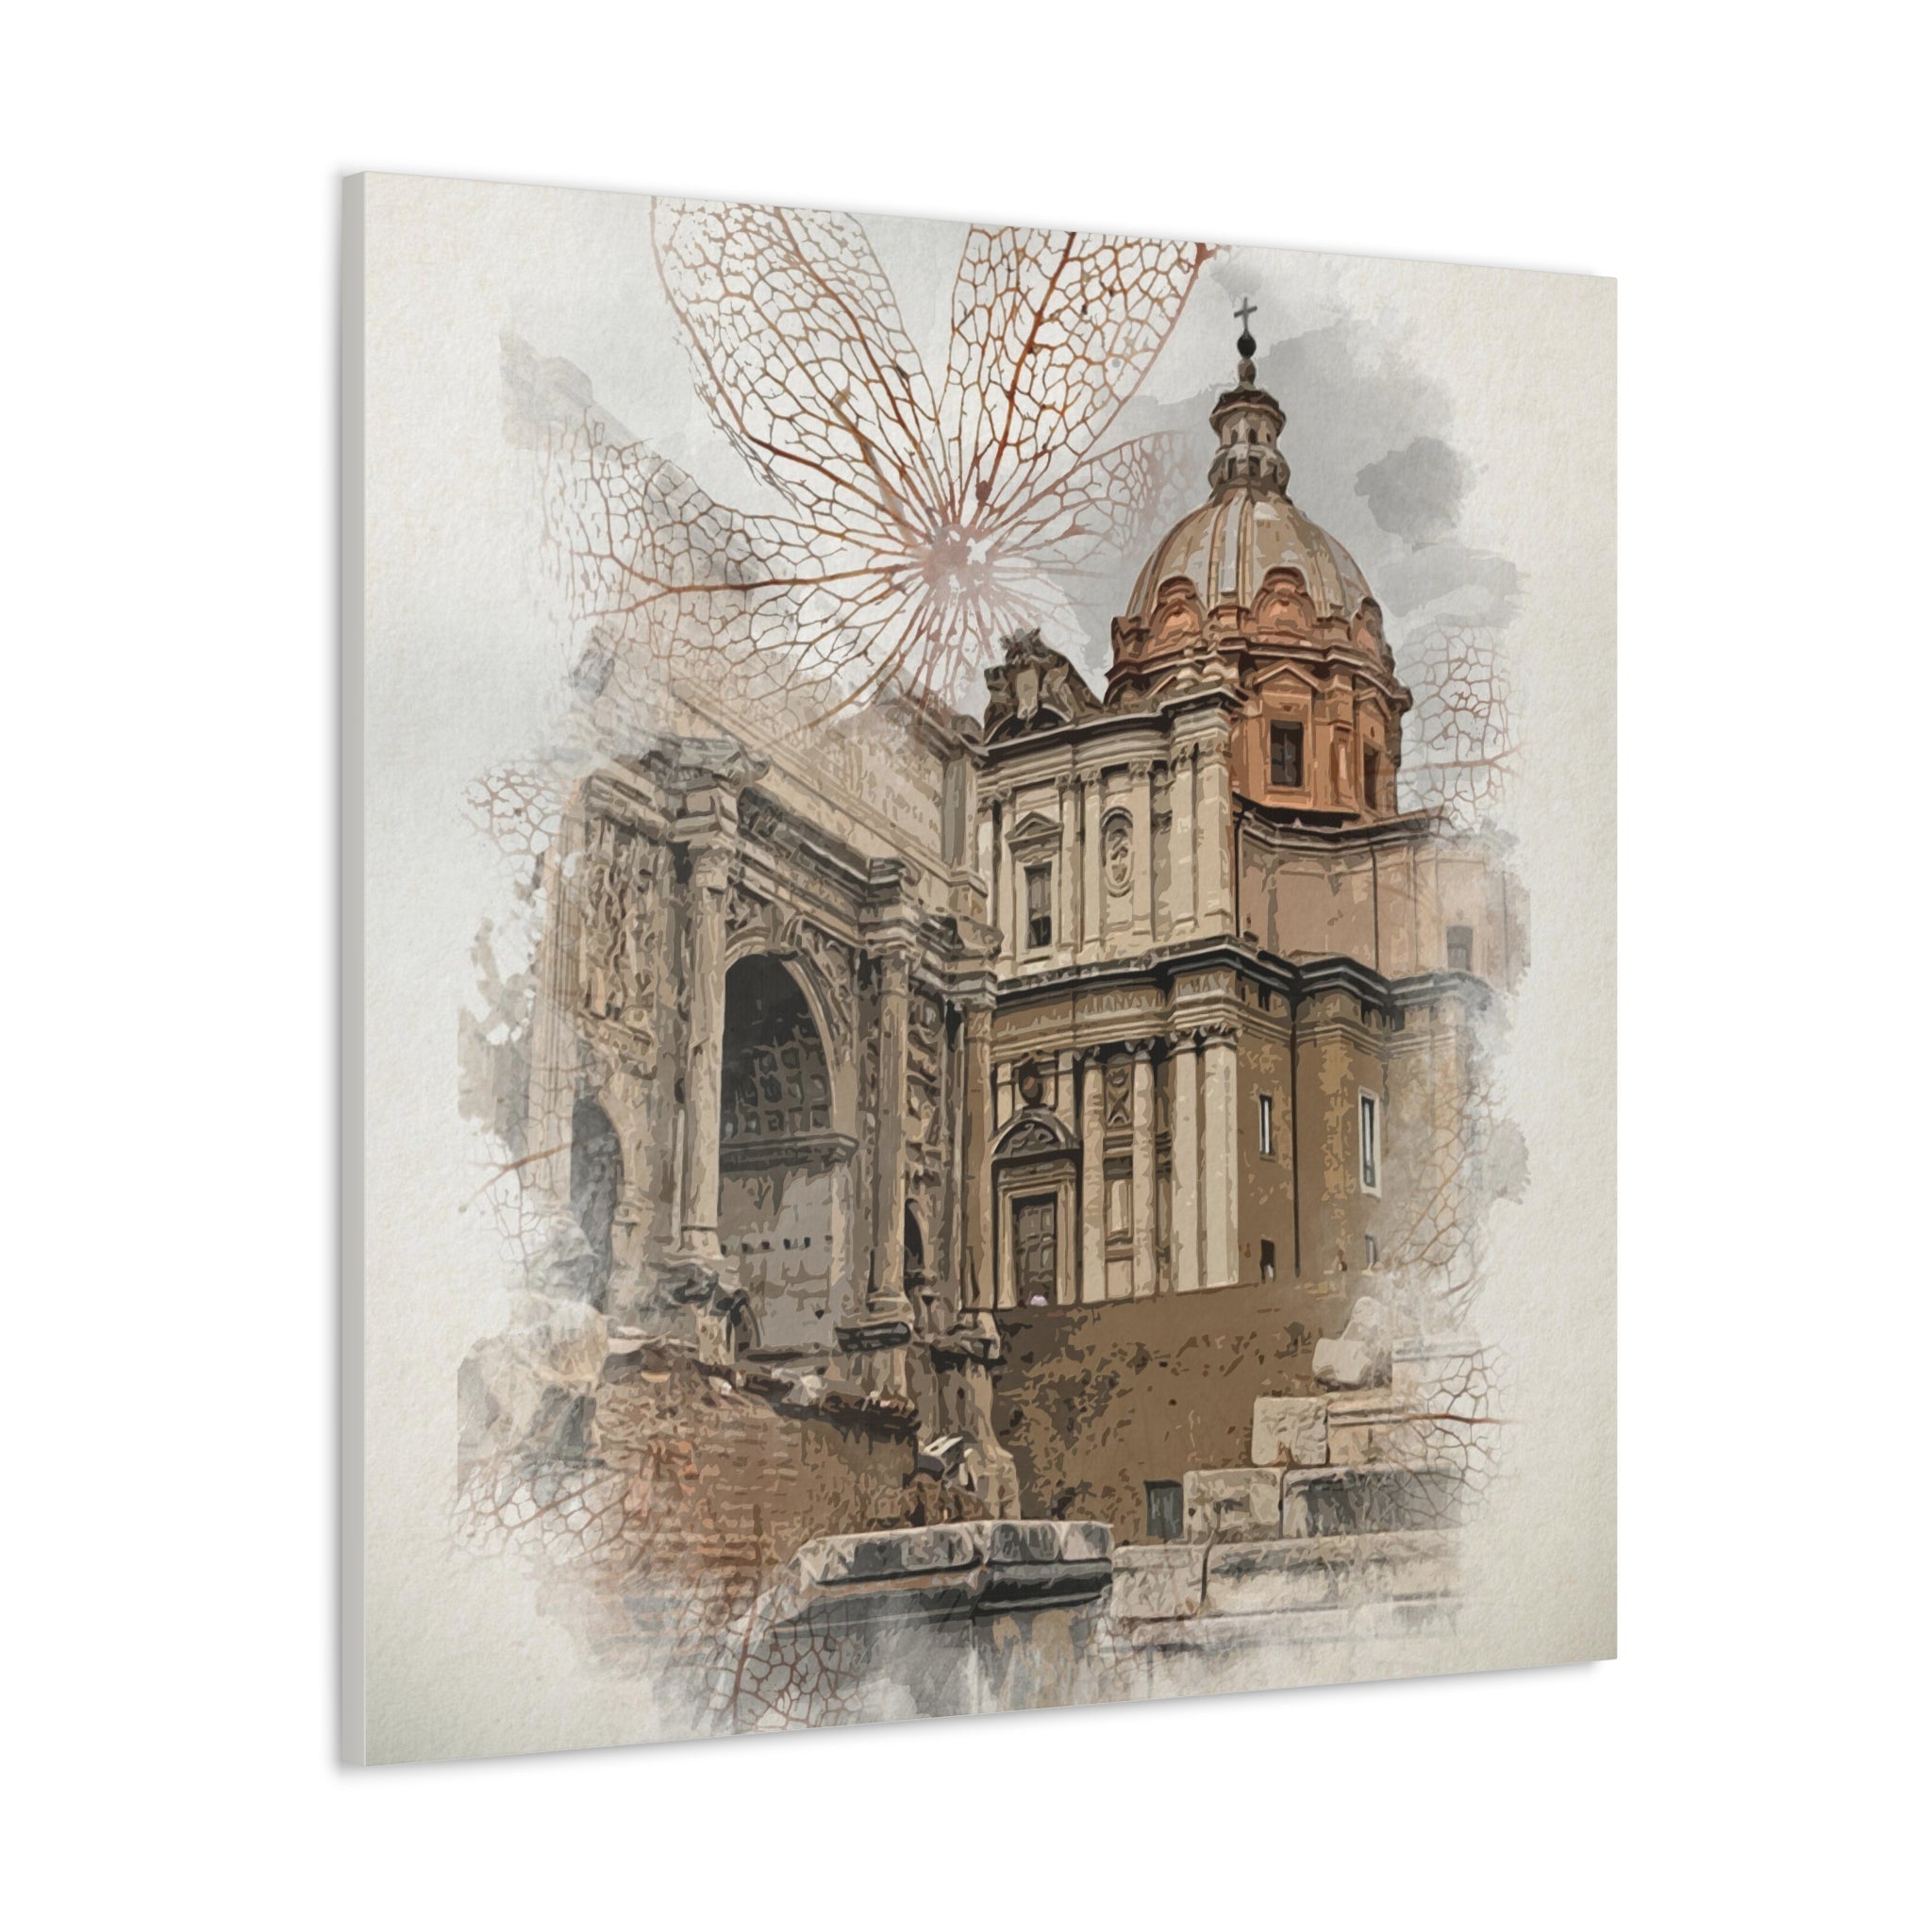 Stitched canvas print: 'Beauty of Aging' wall decor artwork.